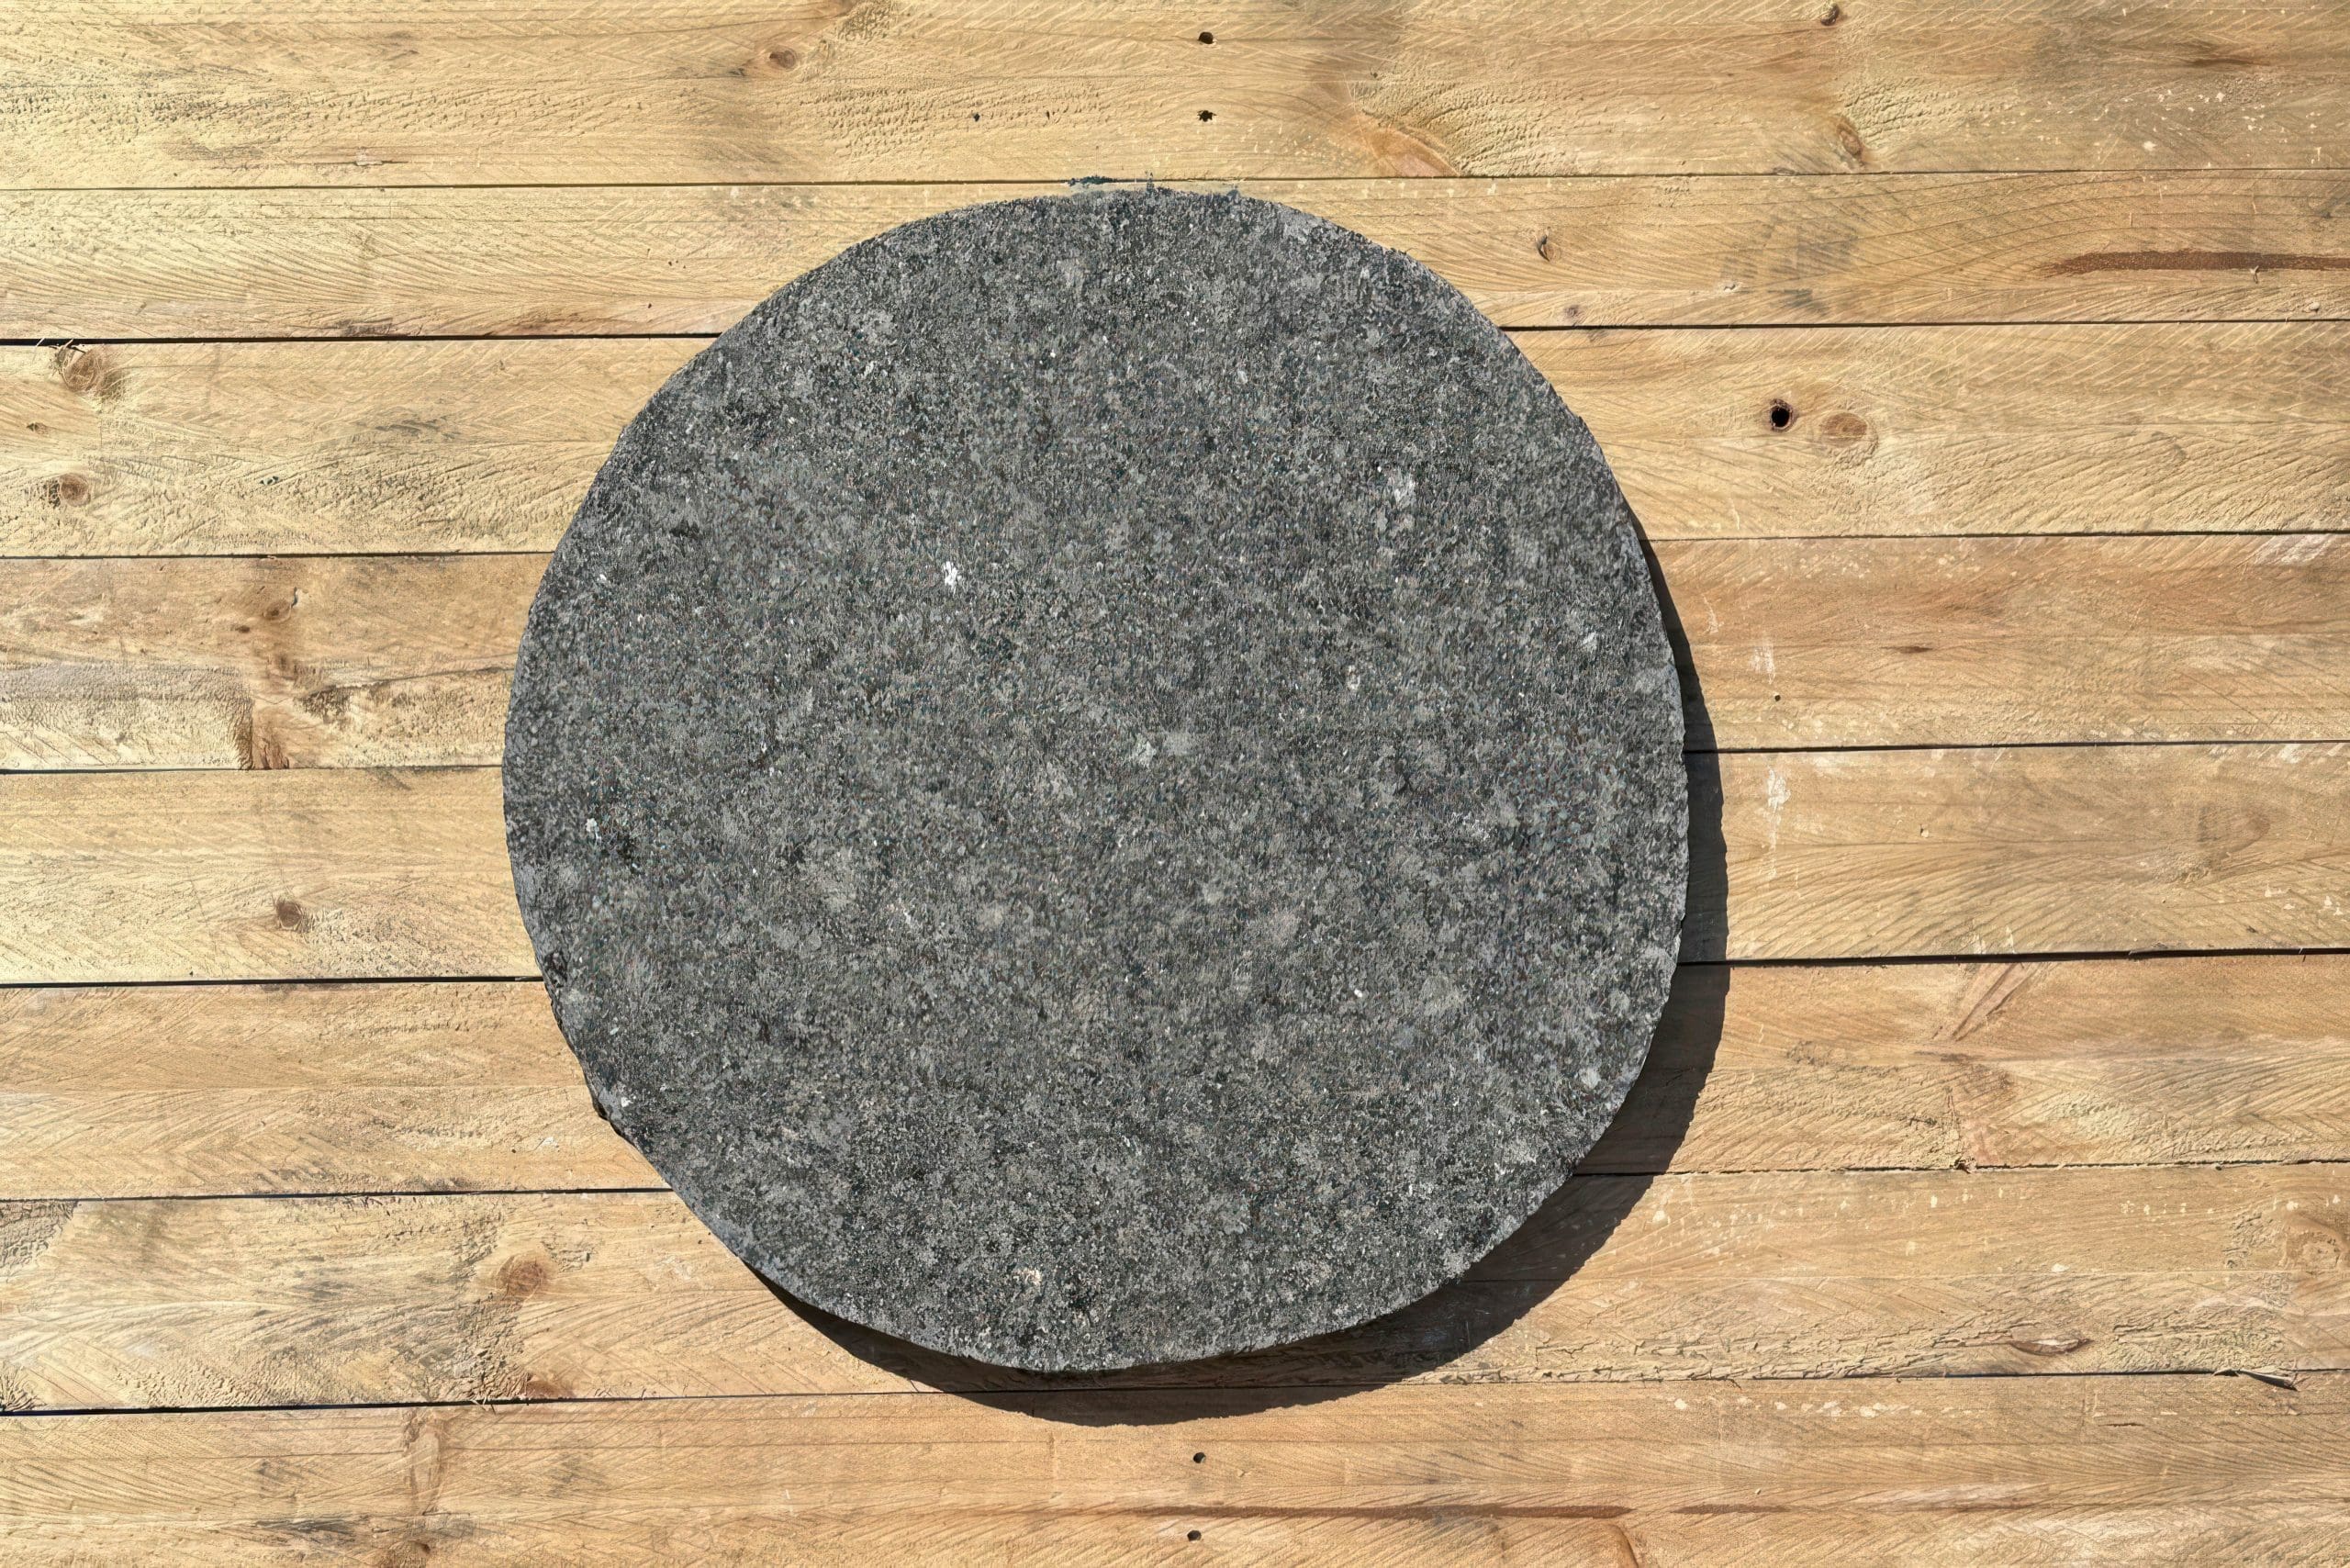 IMPALA BLACK GRANITE STEPPING STONES_RMS TRADERS_NATURAL STONE SUPPLIER MELBOURNE (3))